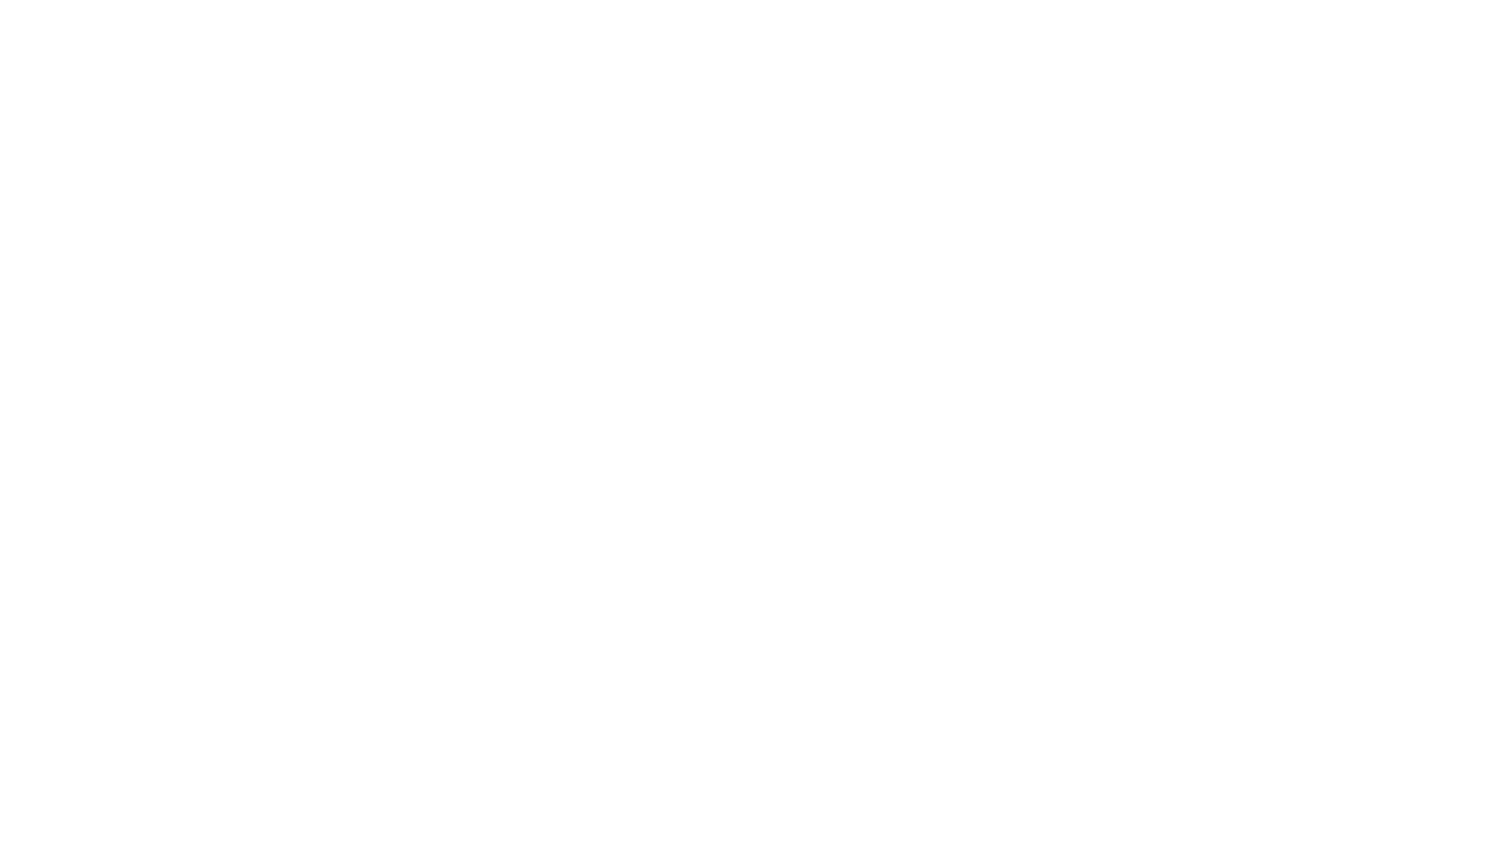 Timeline Productions